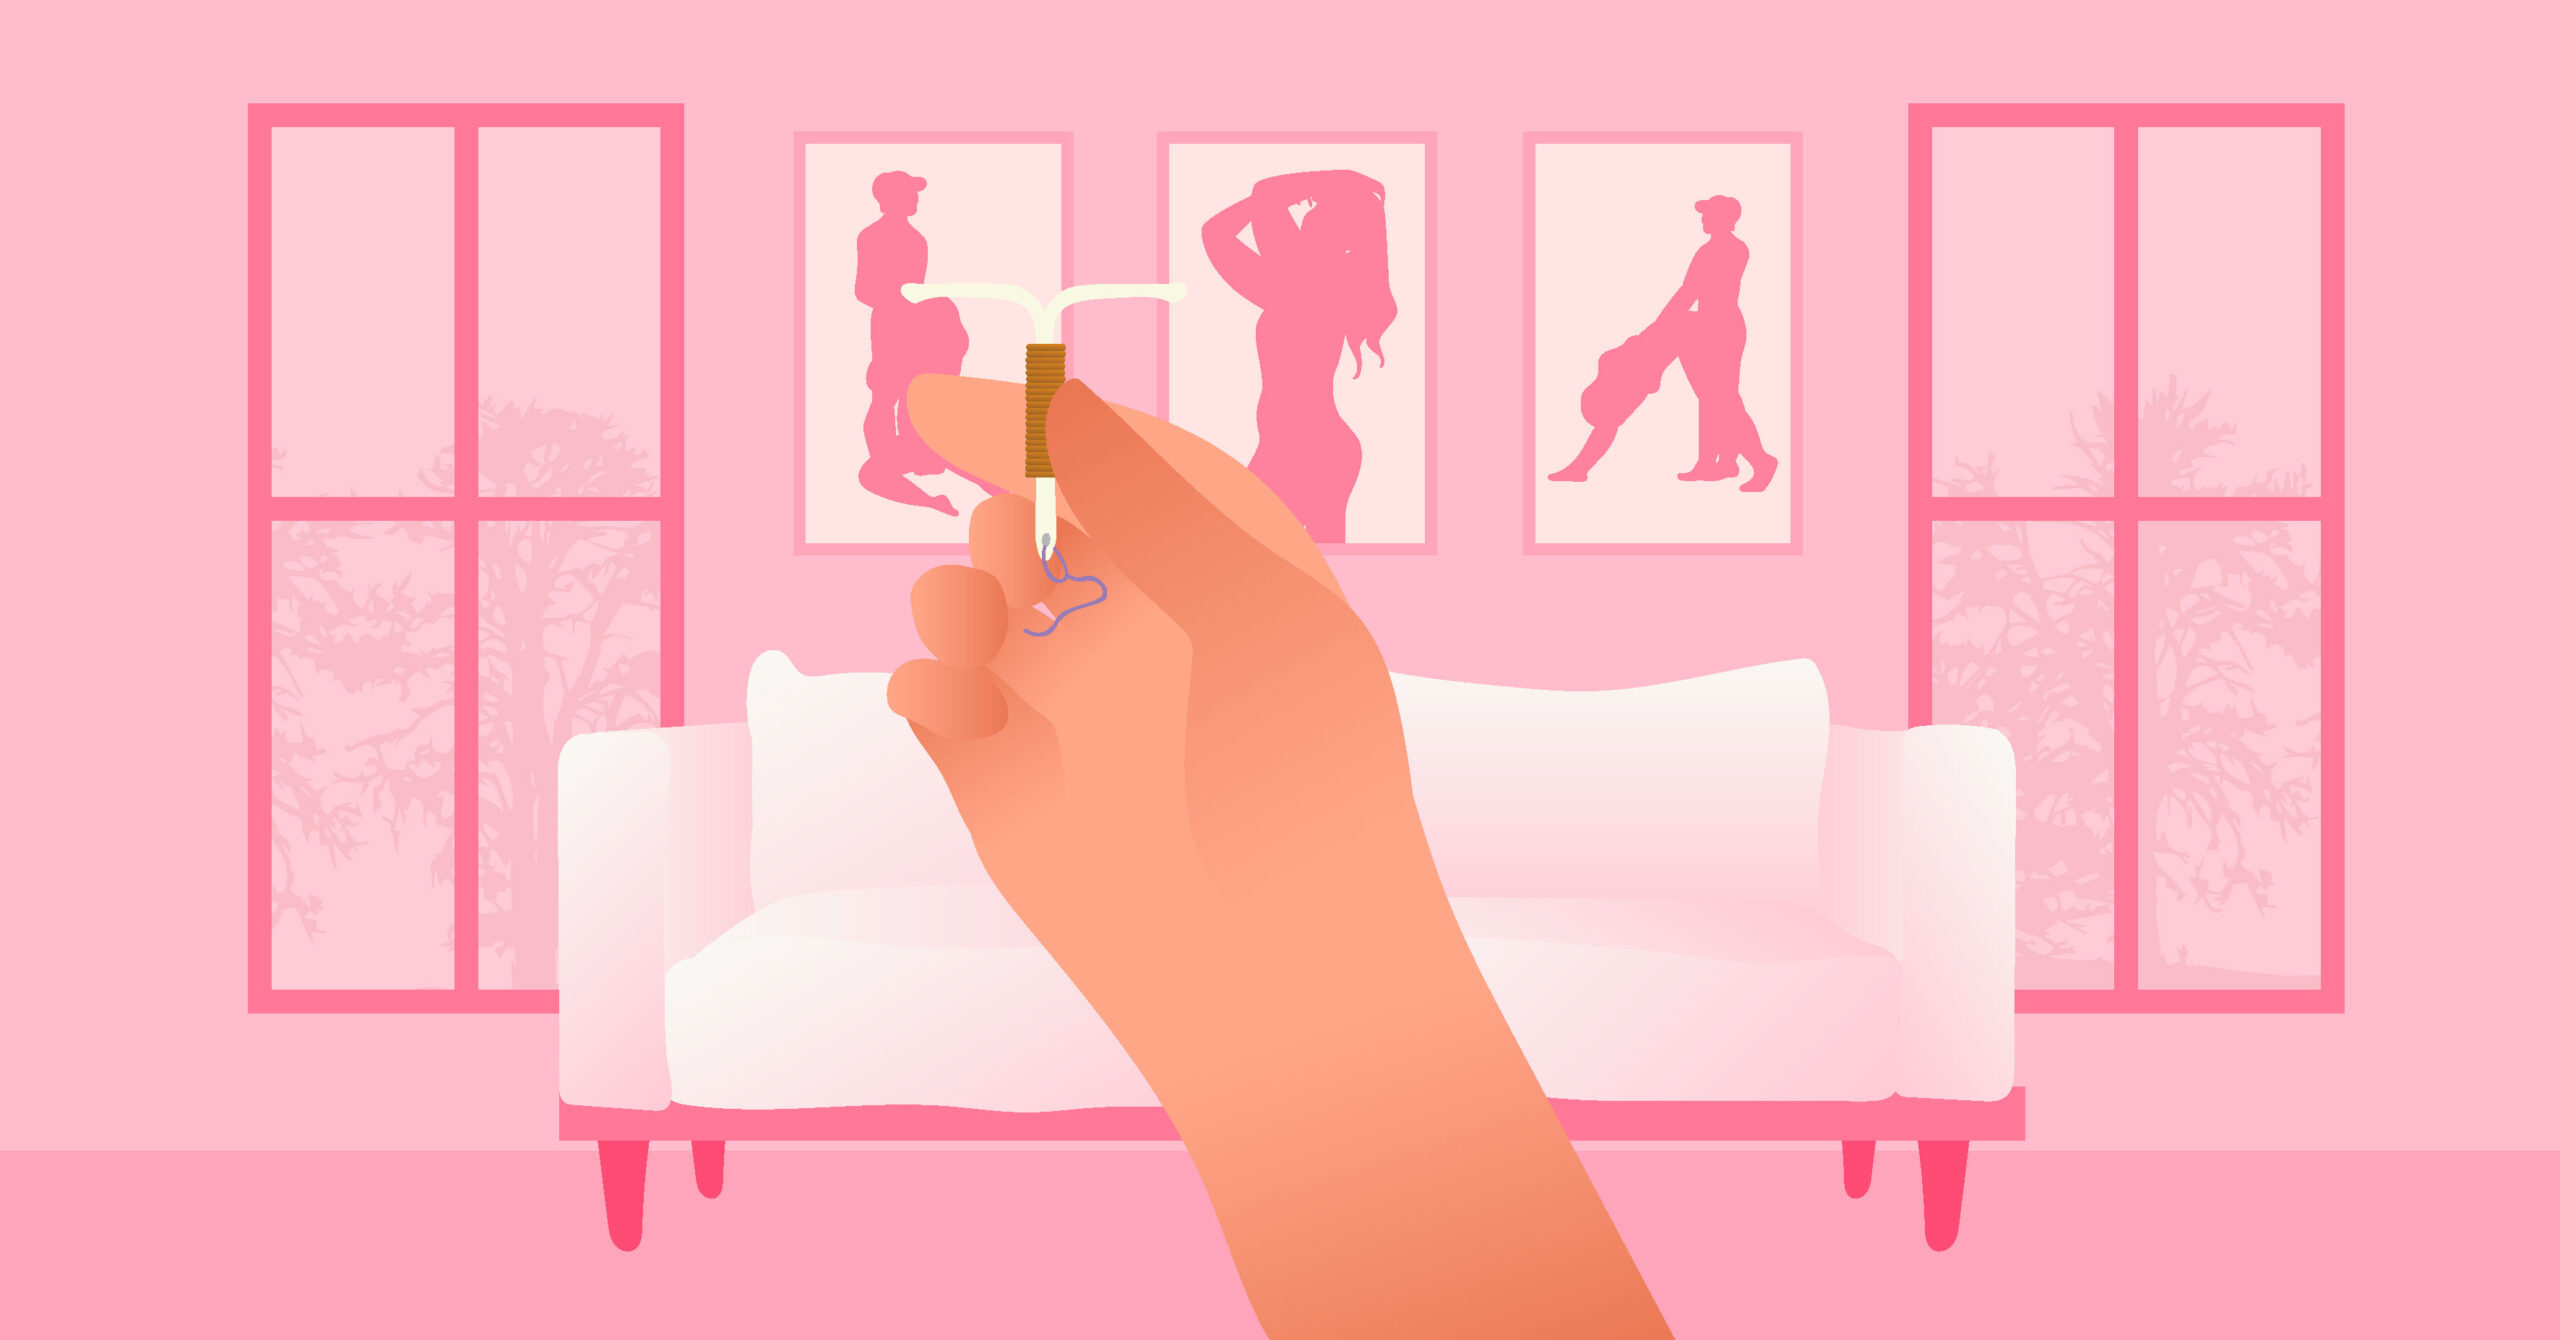 10 Pros & Cons of Long-Acting Reversible Contraception (LARC)